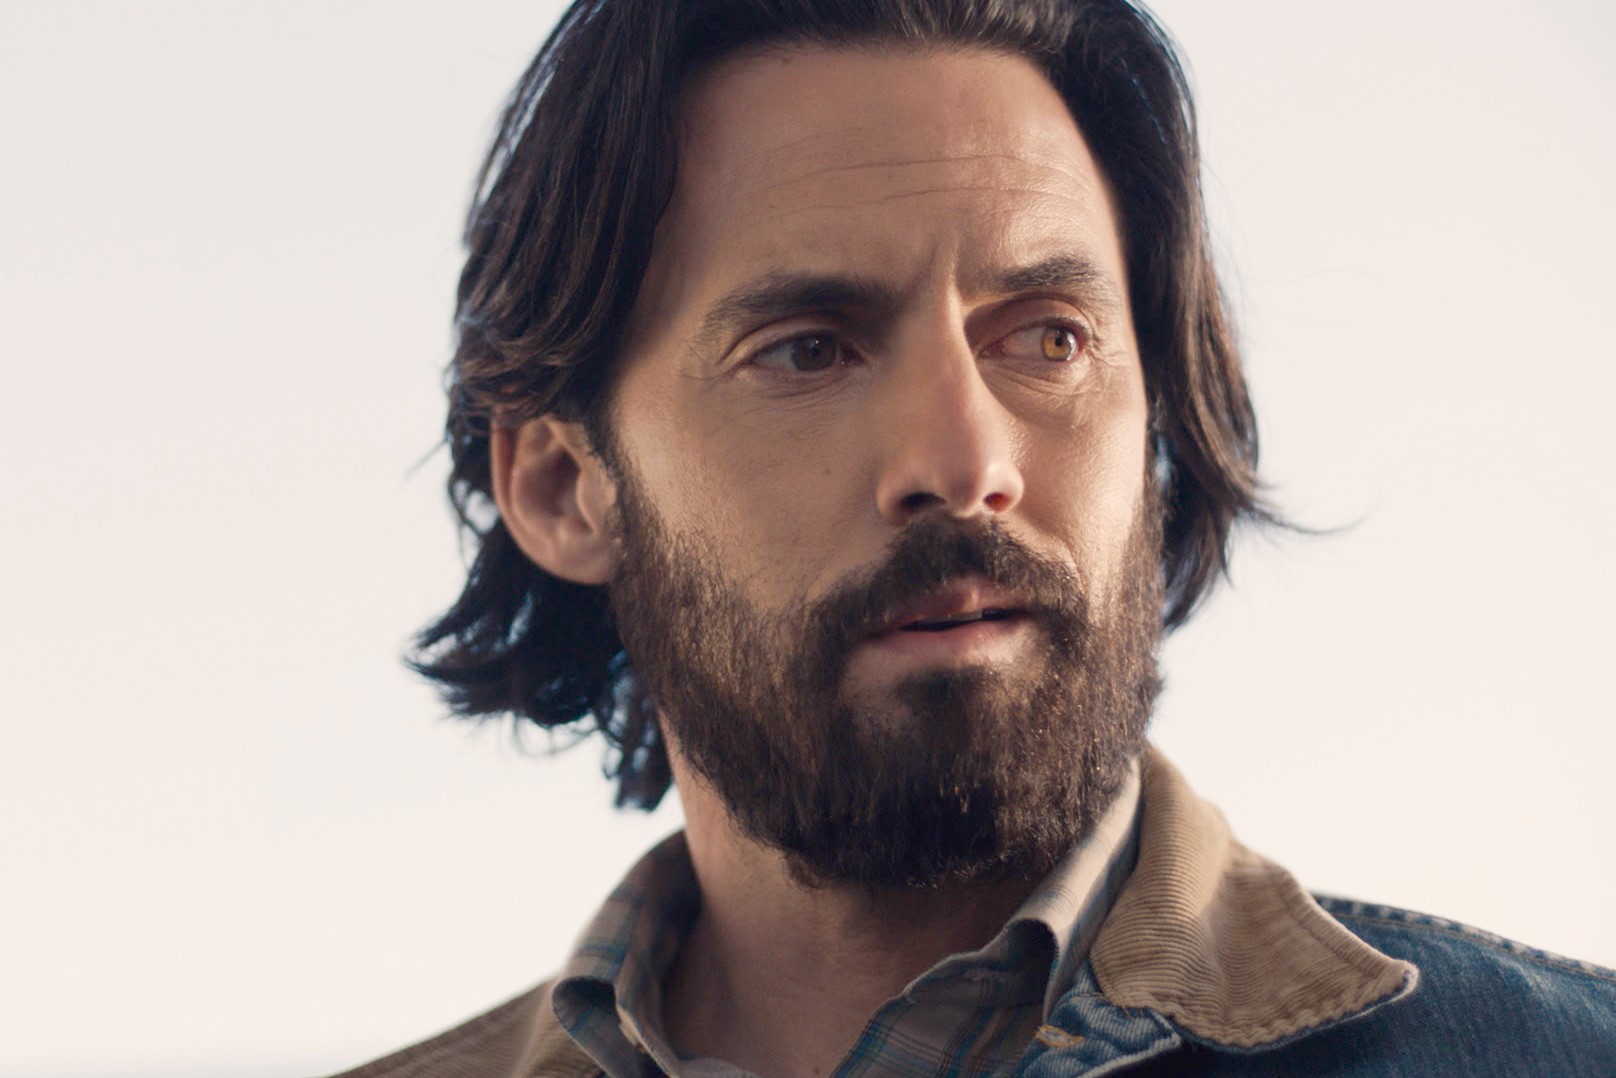 Milo Ventimiglia, in character as Jack Pearson in 'This Is Us' Season 5, wears a jean jacket over a blue and tan plaid shirt.